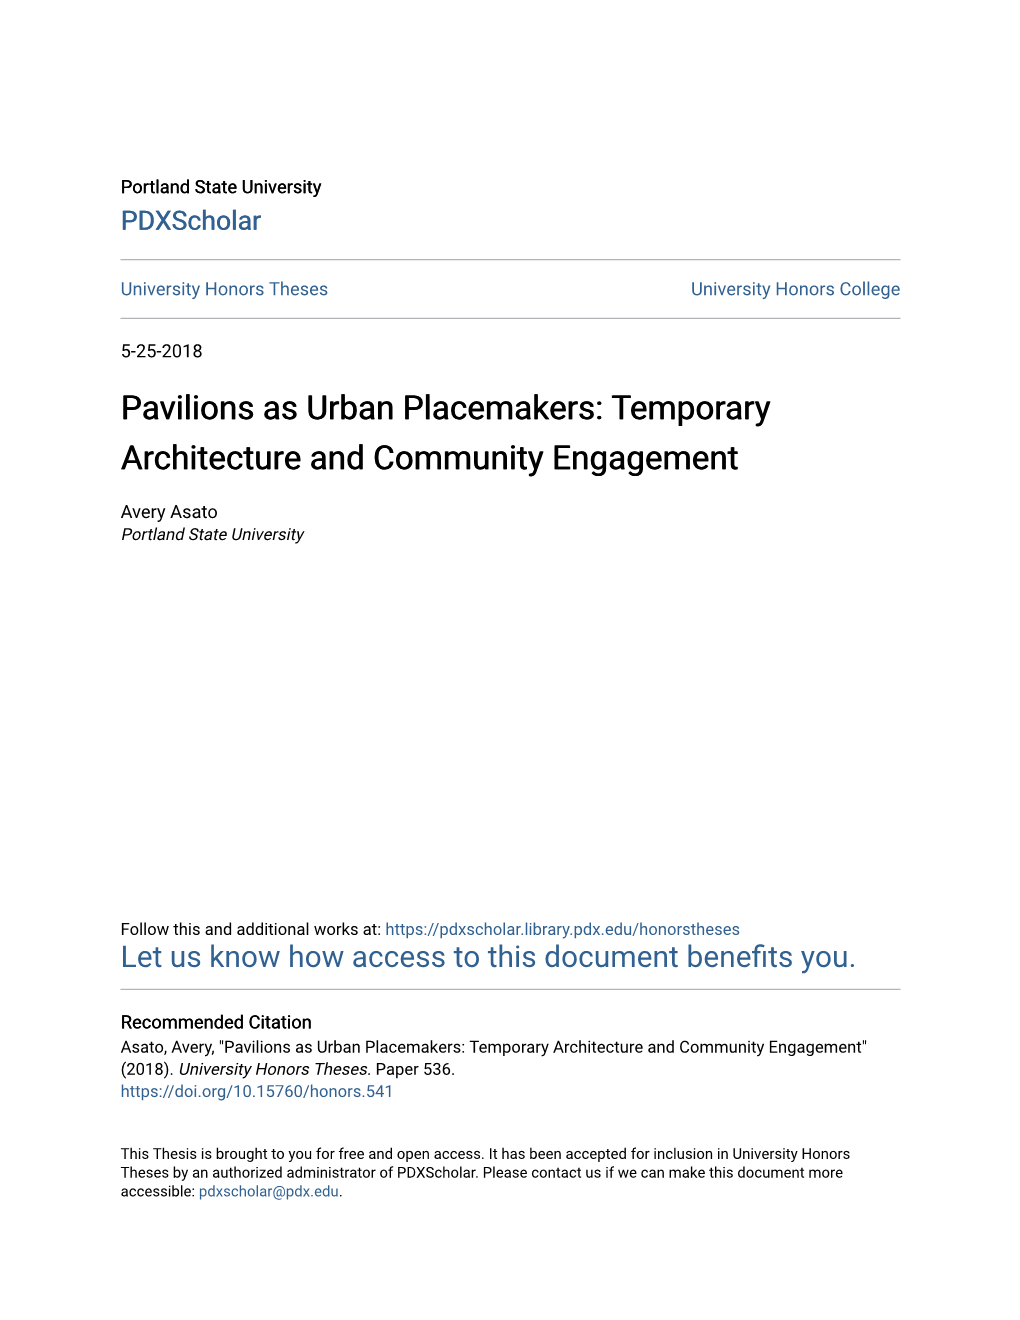 Pavilions As Urban Placemakers: Temporary Architecture and Community Engagement